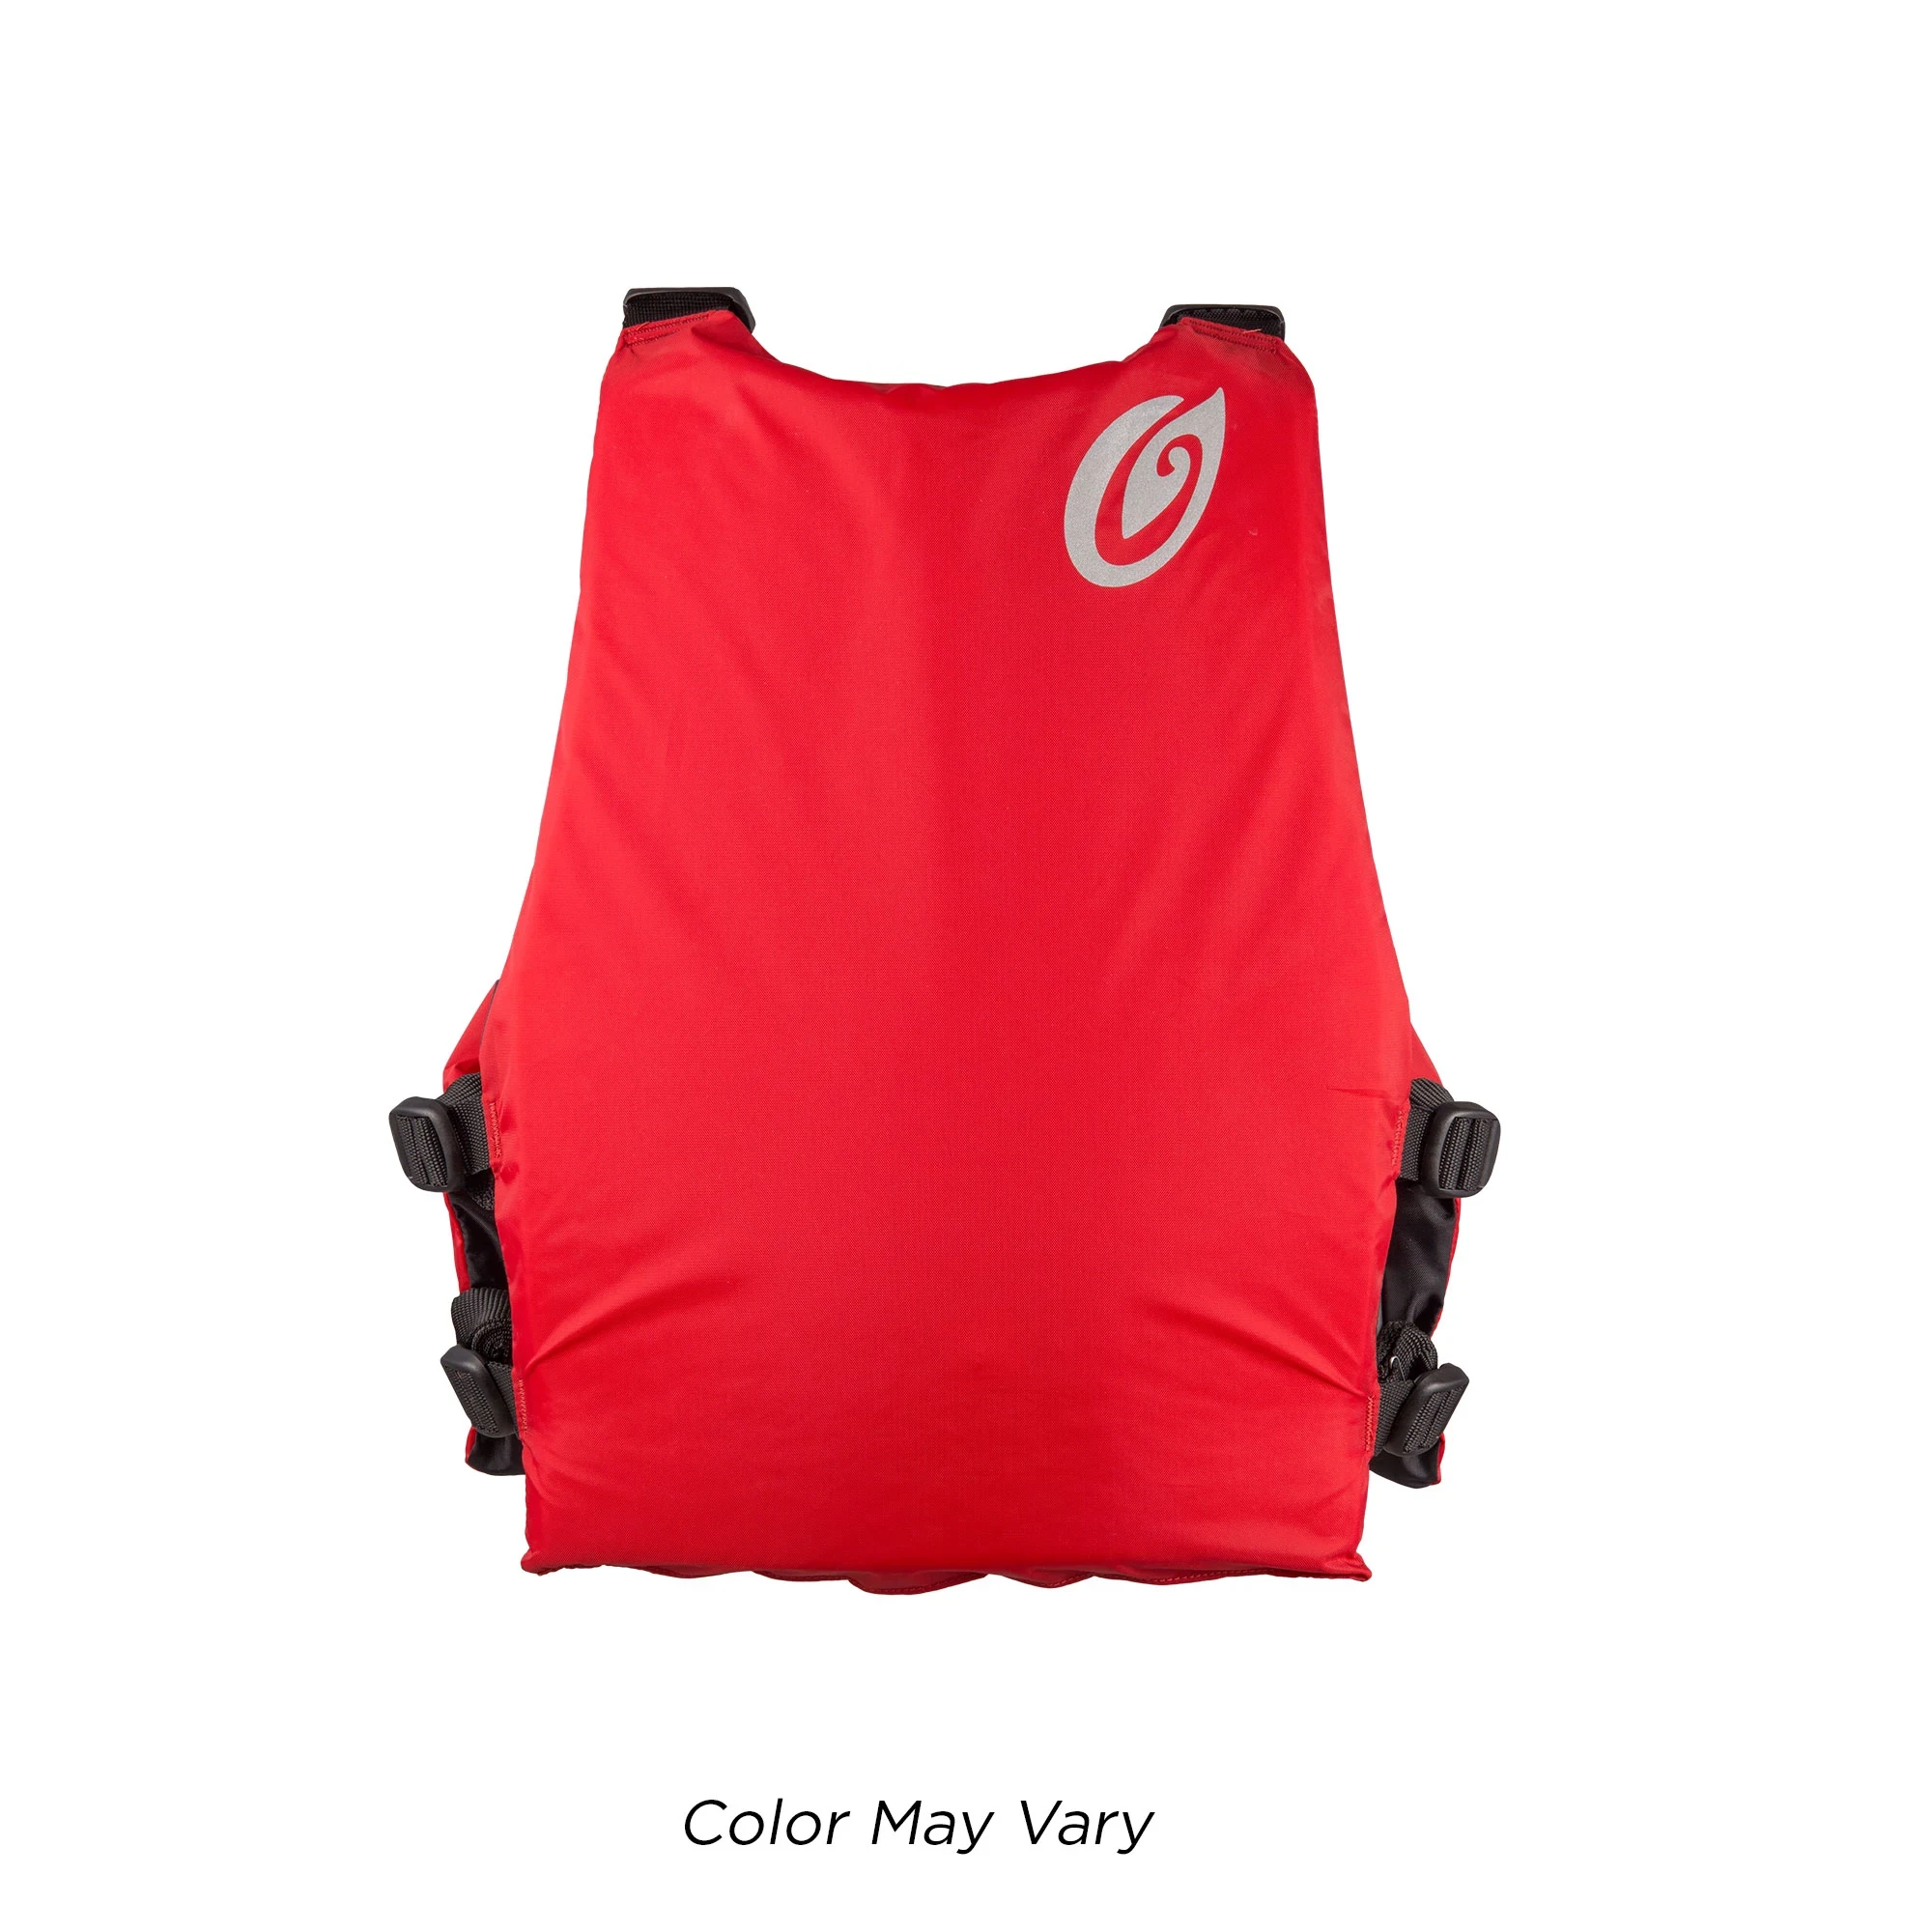 Back view of Outfitter Universal PFD included in Ocean Kayak Caper Old Glory Bundle